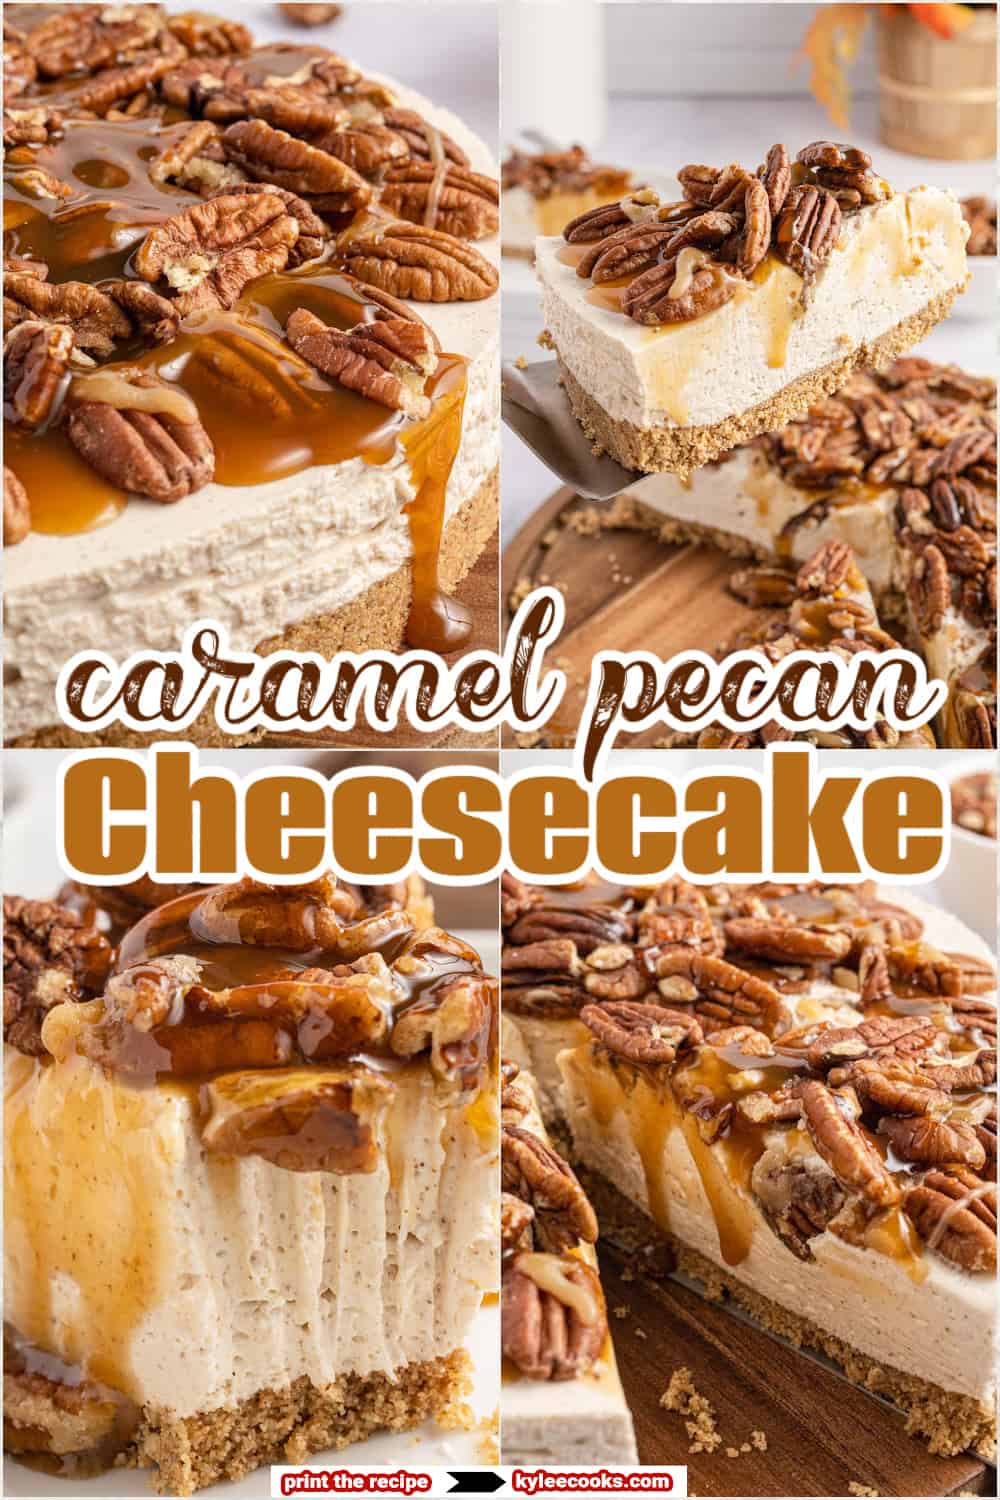 caramel pecan cheesecake on a wooden board with recipe name overlaid in text.